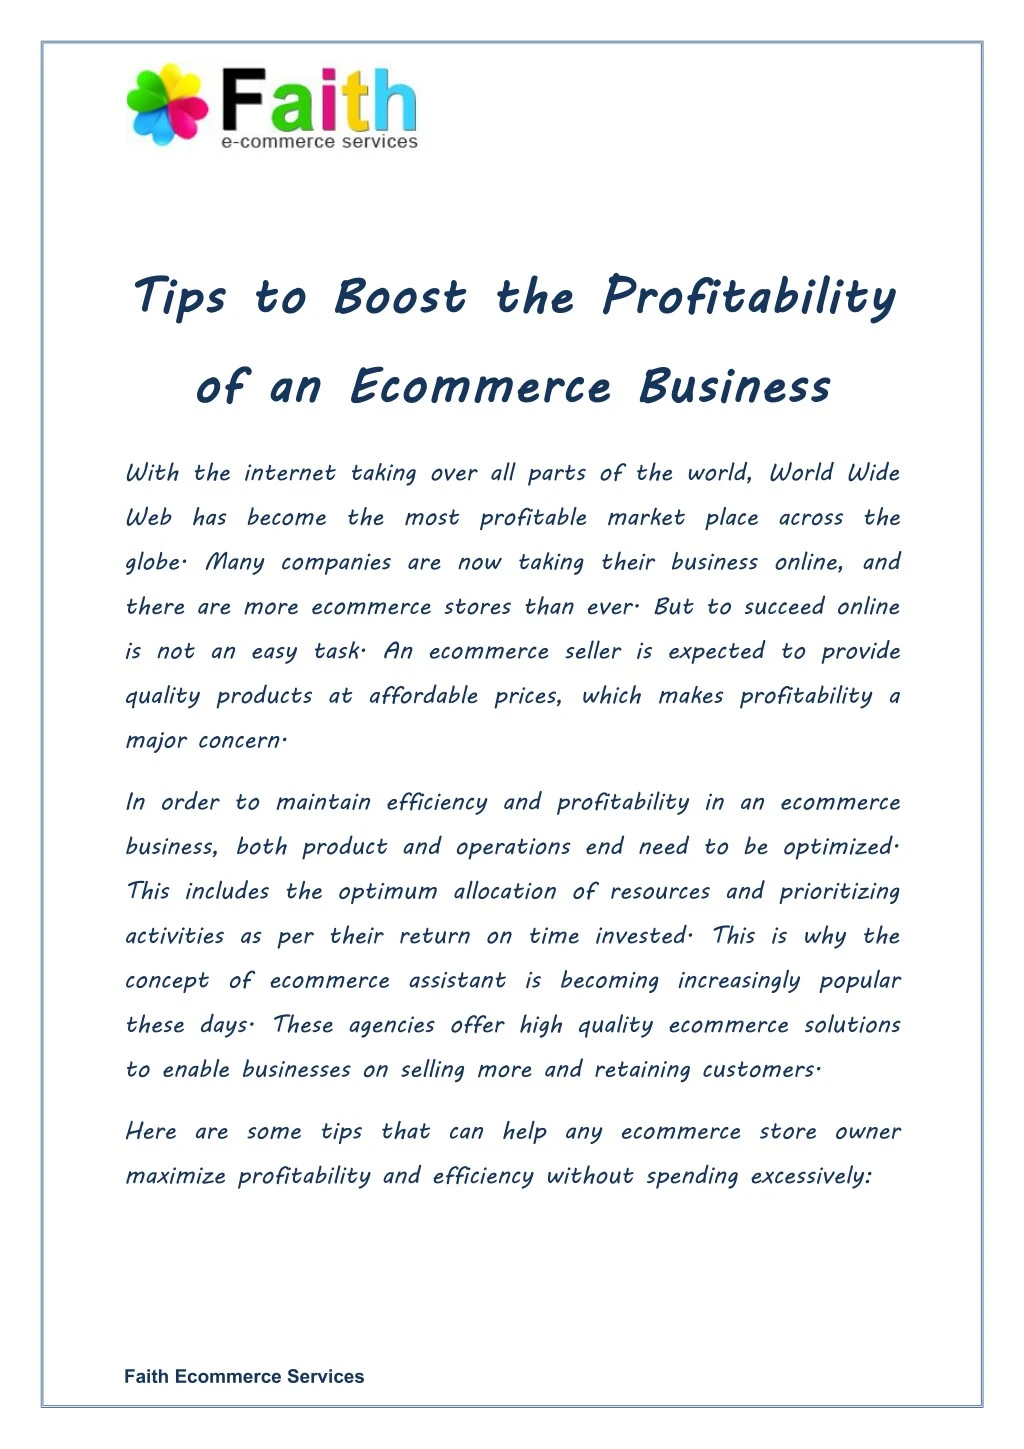 tips to boost the profitability of an ecommerce